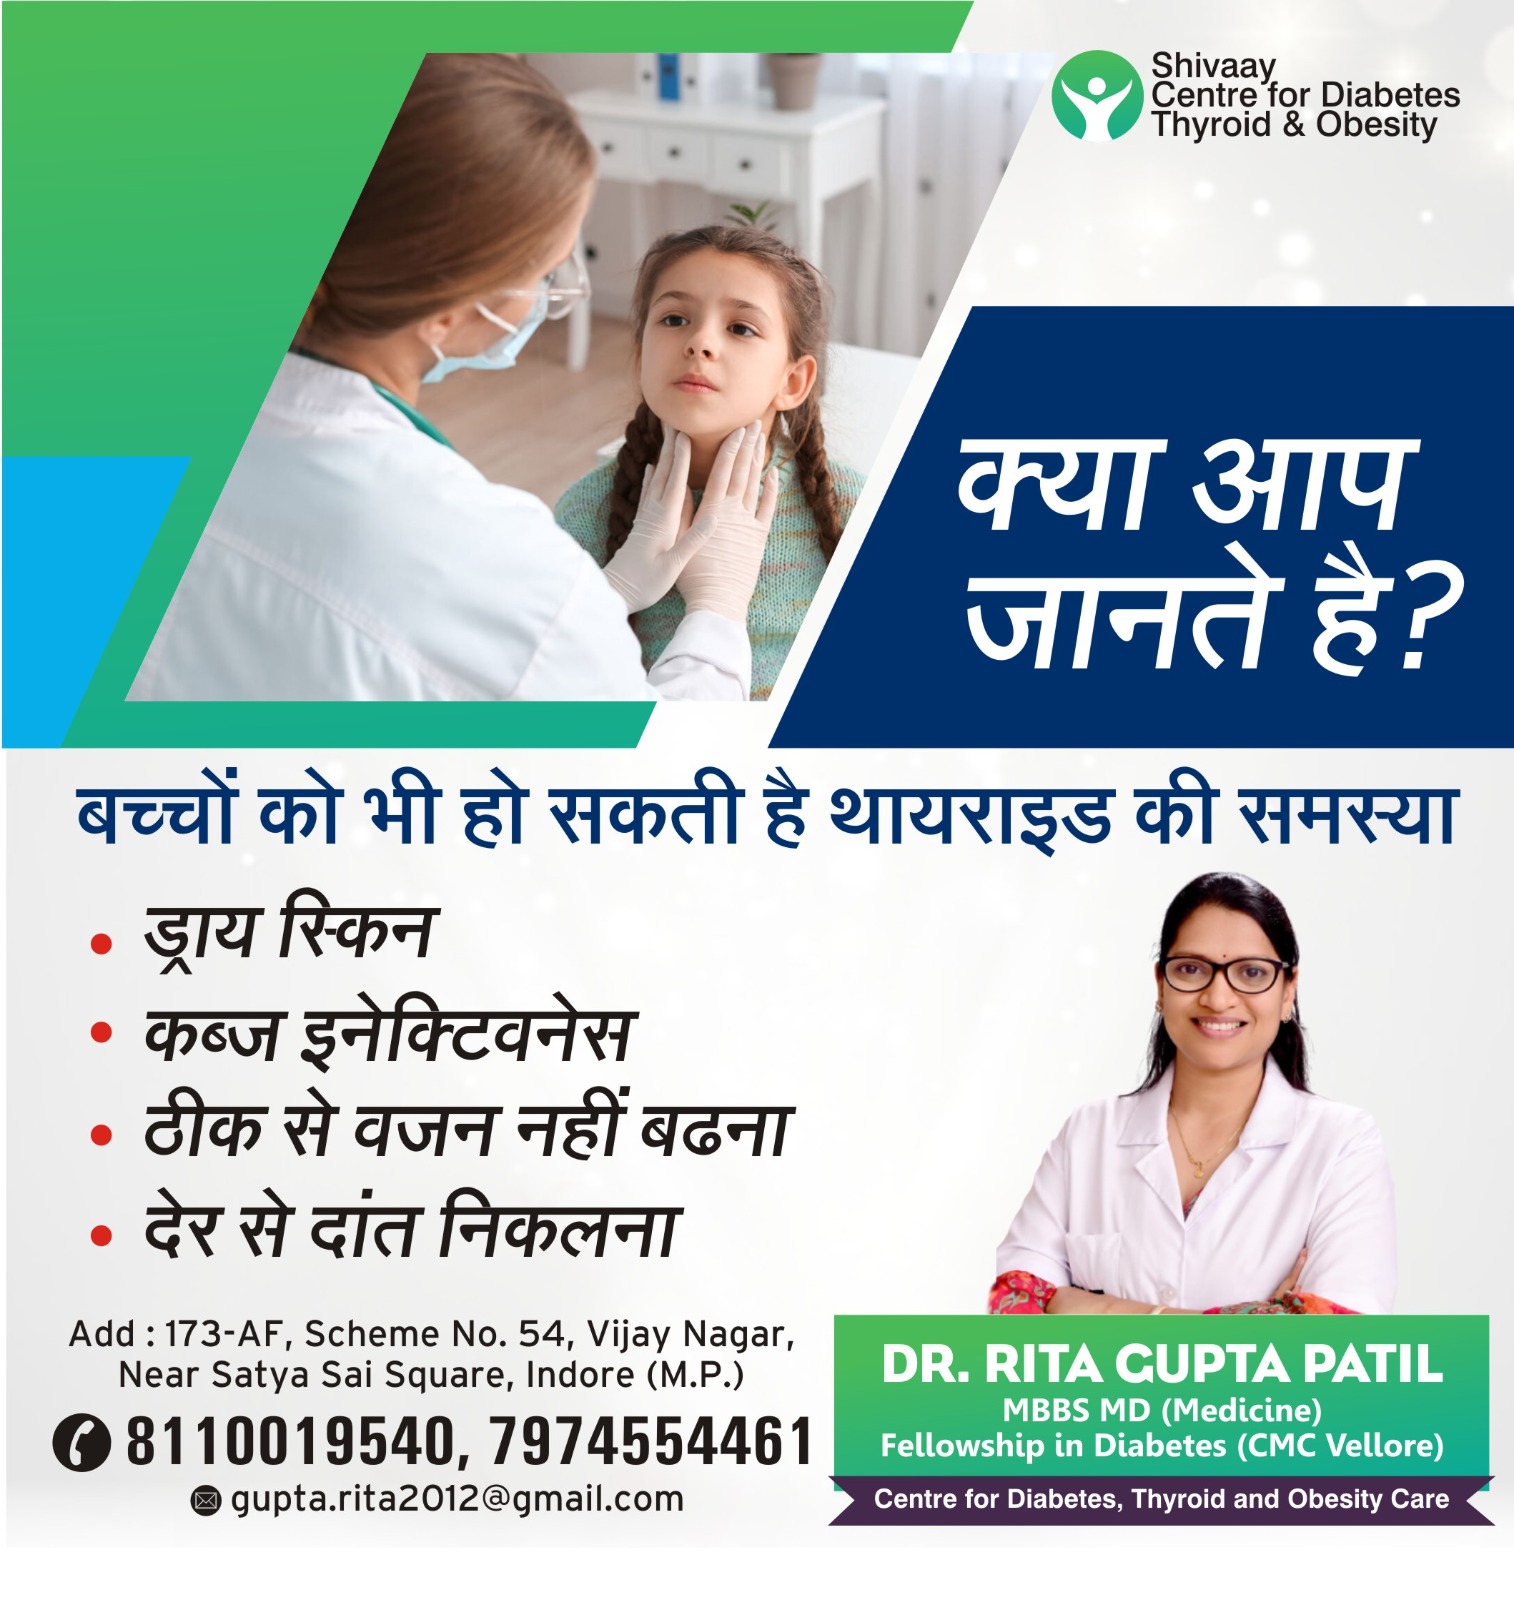 Child Thyroid Treatment in Indore